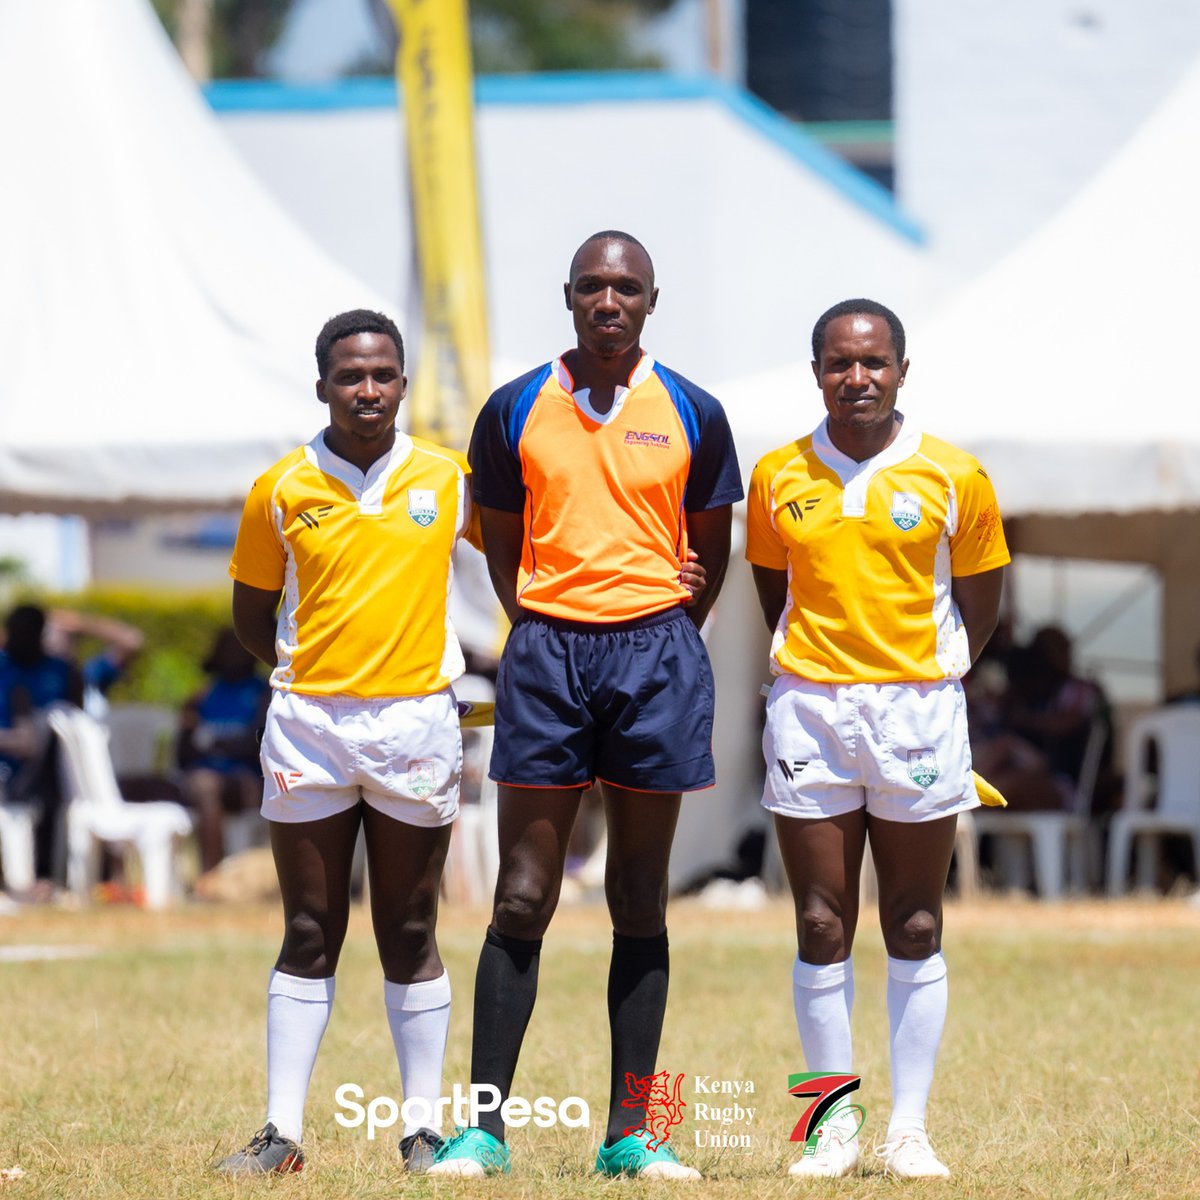 Under the continuing exchange and partnership programme, we hosted Umaru Balikanda from @UgandaRugby at the just ended #Tisap7s in Eldoret. We hope to see more match officials take part in this programme in the future.